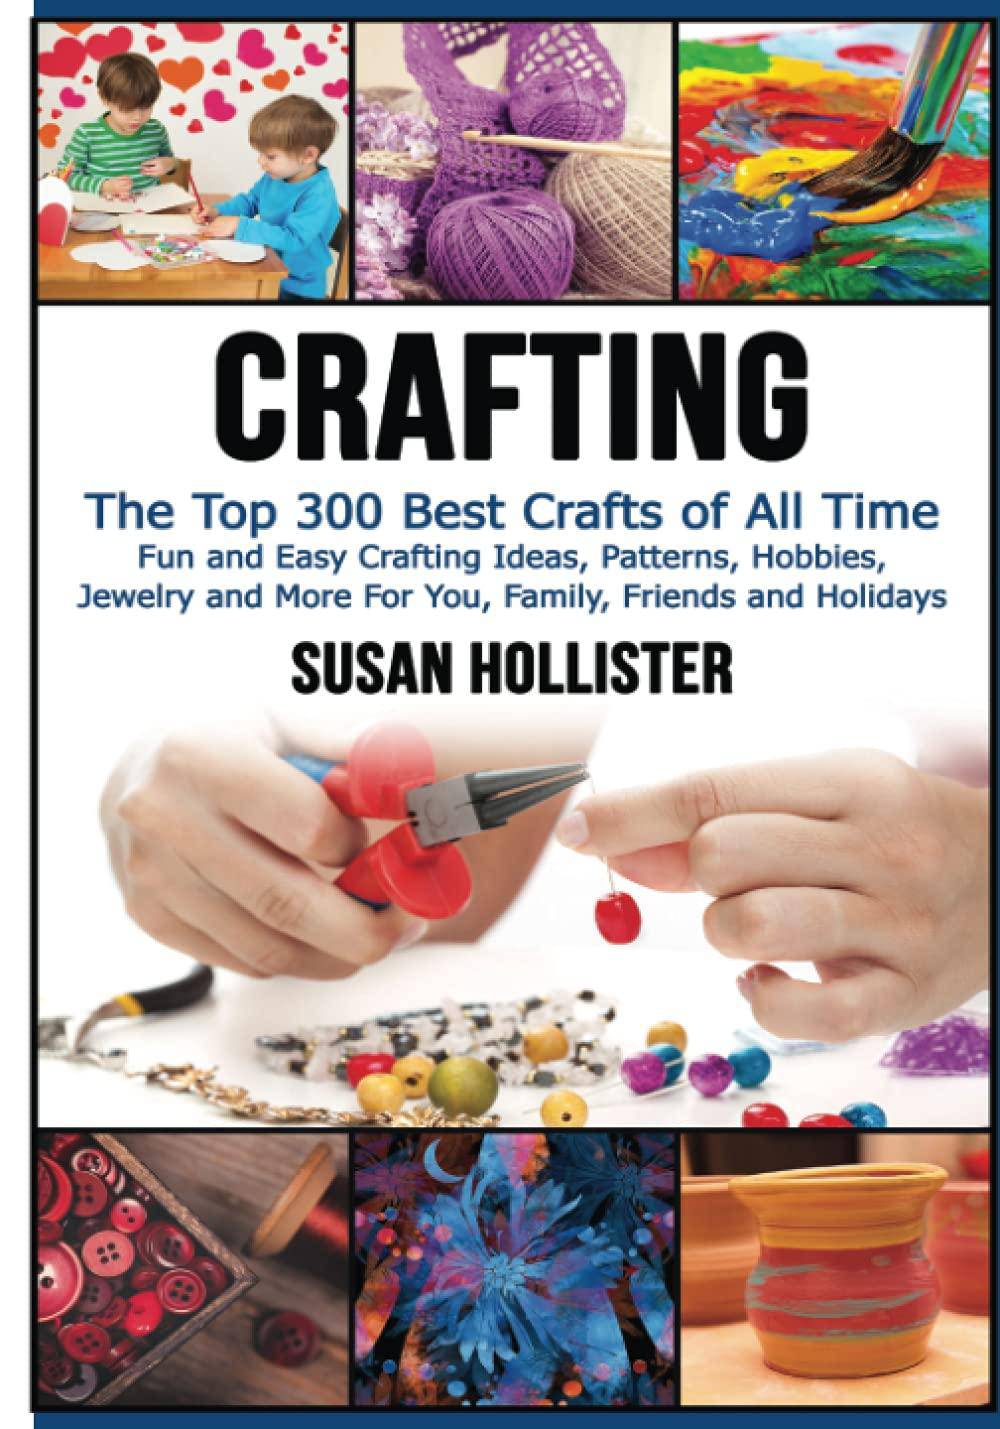 Crafting: The Top 300 Best Crafts - SureShot Books Publishing LLC